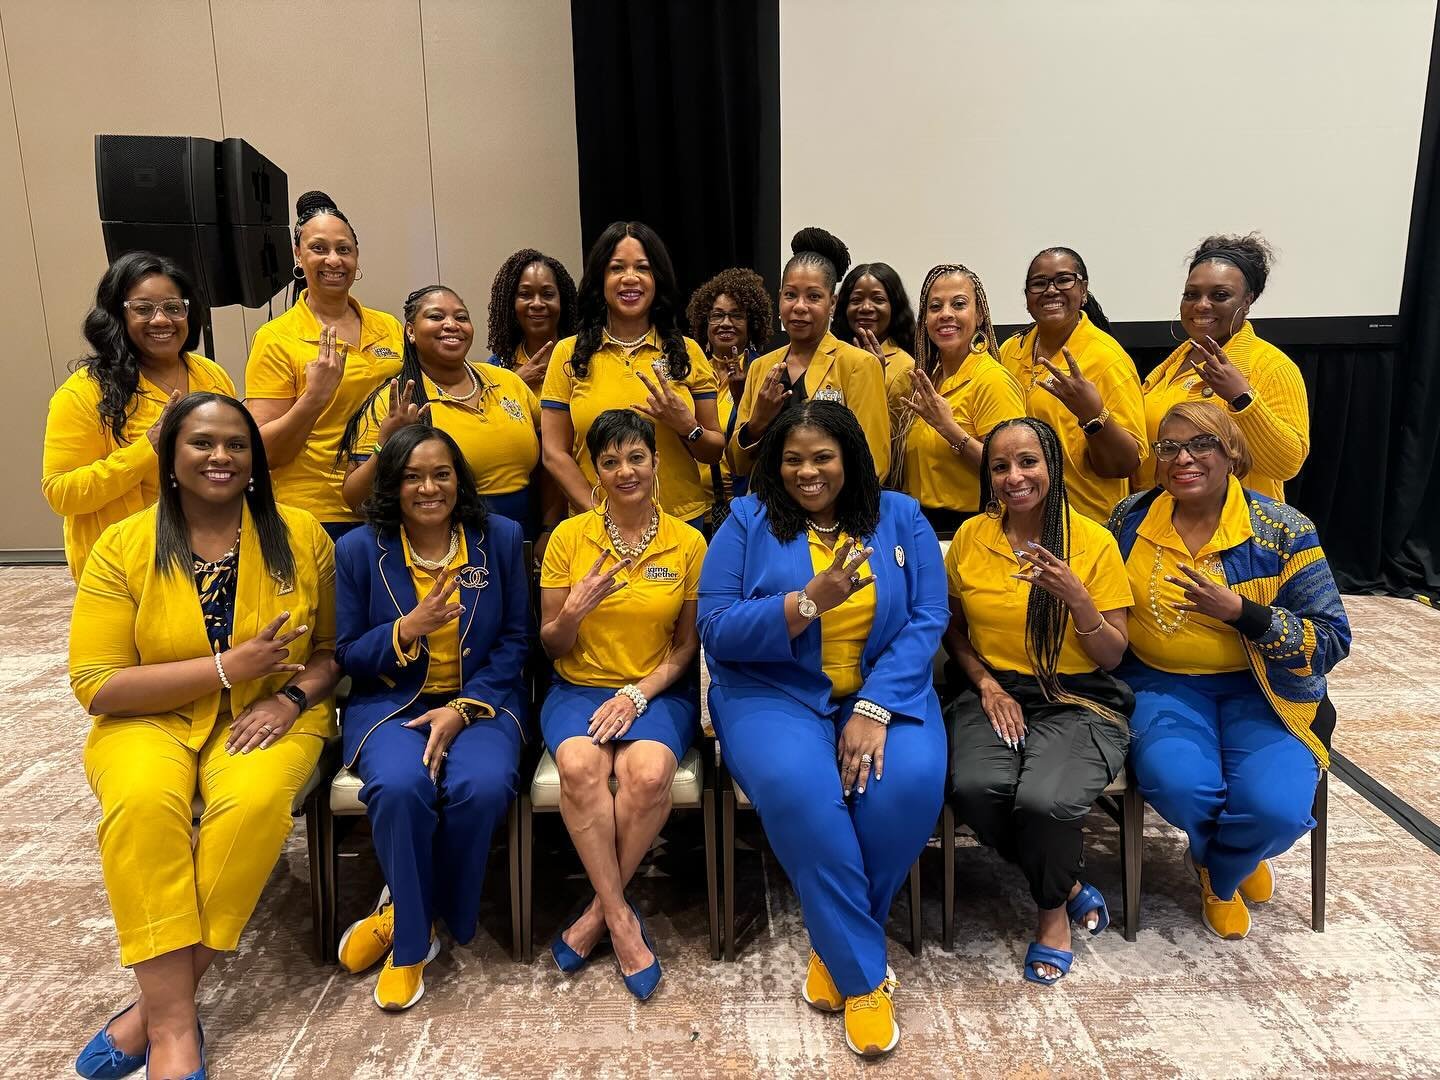 The Legendary Lambda Gamma Sigma - Pomona Valley Alumnae Chapter of Sigma Gamma Rho Sorority, Inc. checking in from the 72nd Western Region Conference in Las Vegas, NV. Here with our International Grand Basileus @sgrho25igb along with more Internatio